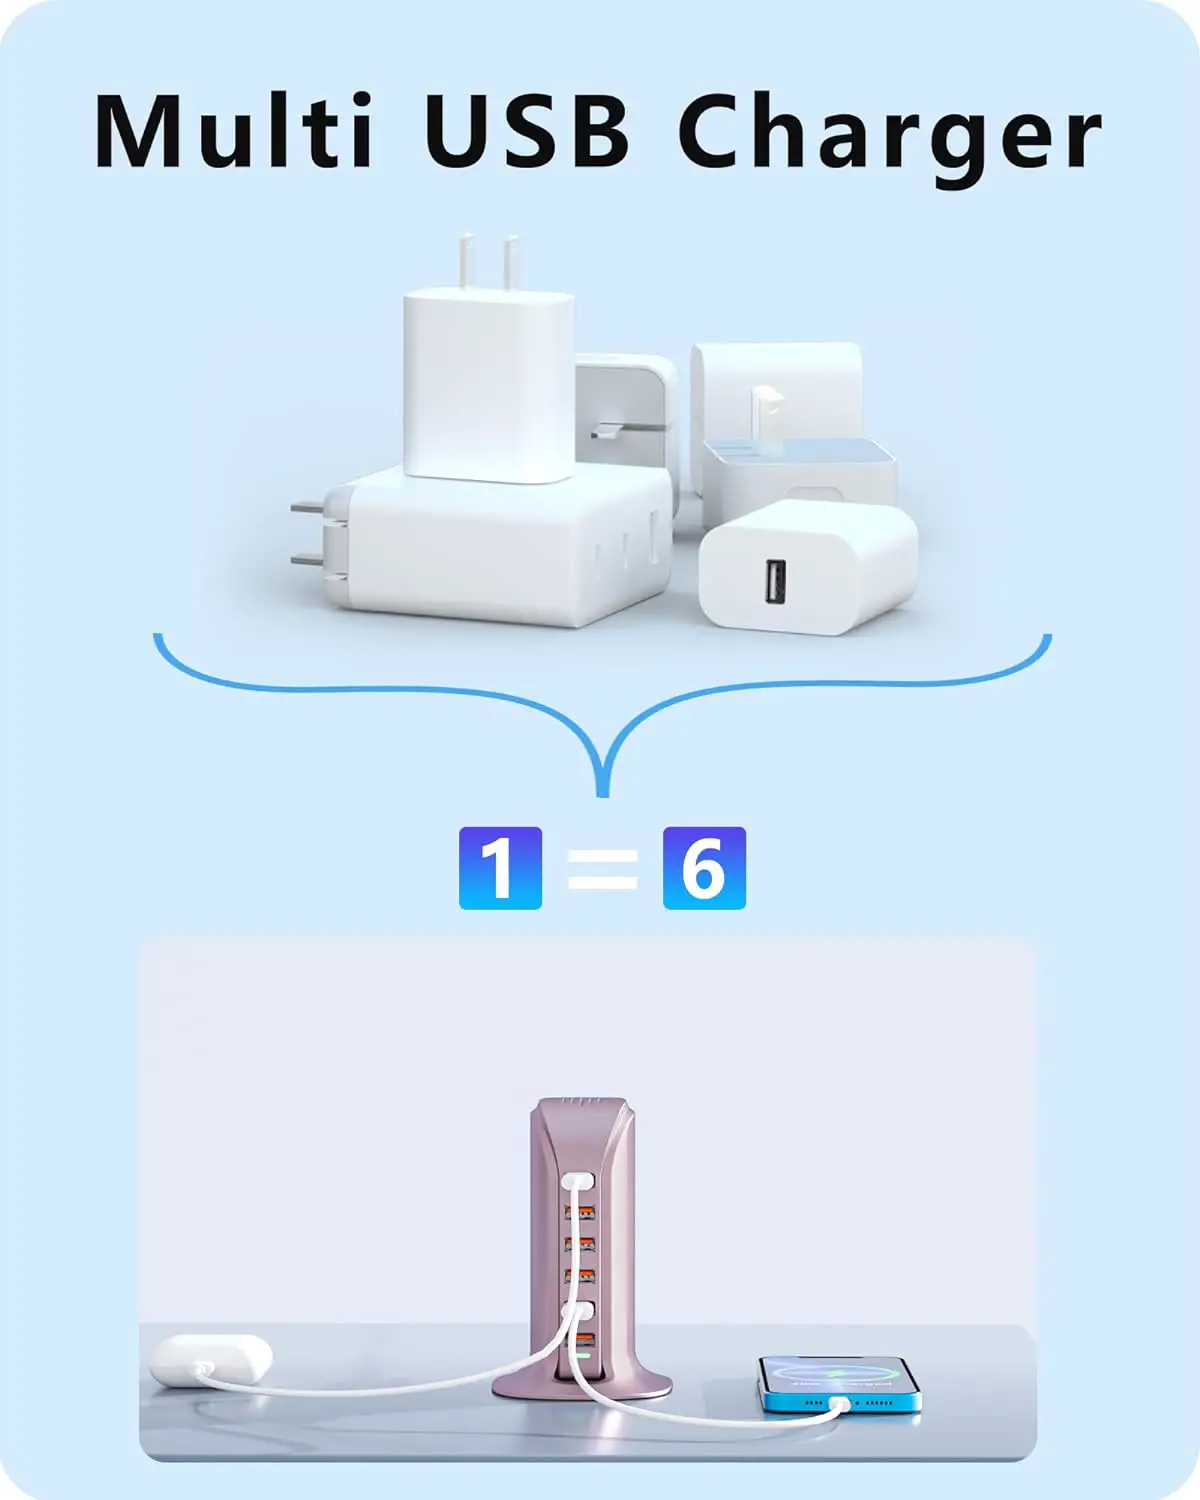 ADRICY USB Charger 6 Port 50W Multi USB Tower Charging Station for Multiple Devices iPhone 14/14 Pro/14 Pro Max/13 Pro/13 Pro Max/Android/Samsung/Tablet,etc(Gold 50W)